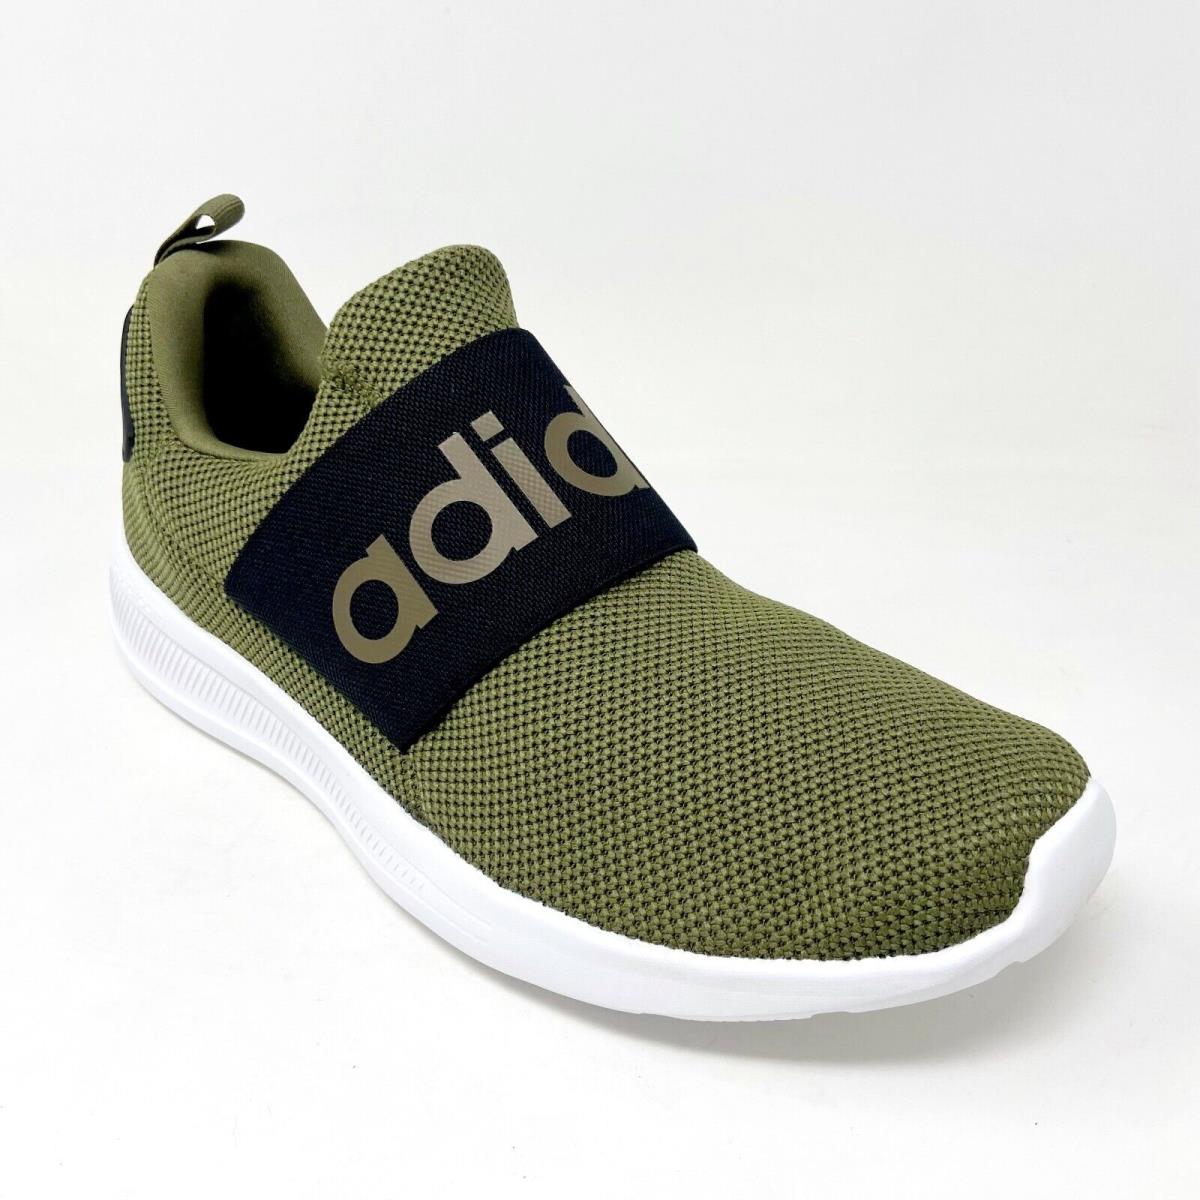 Adidas shoes Lite Racer - Green 0